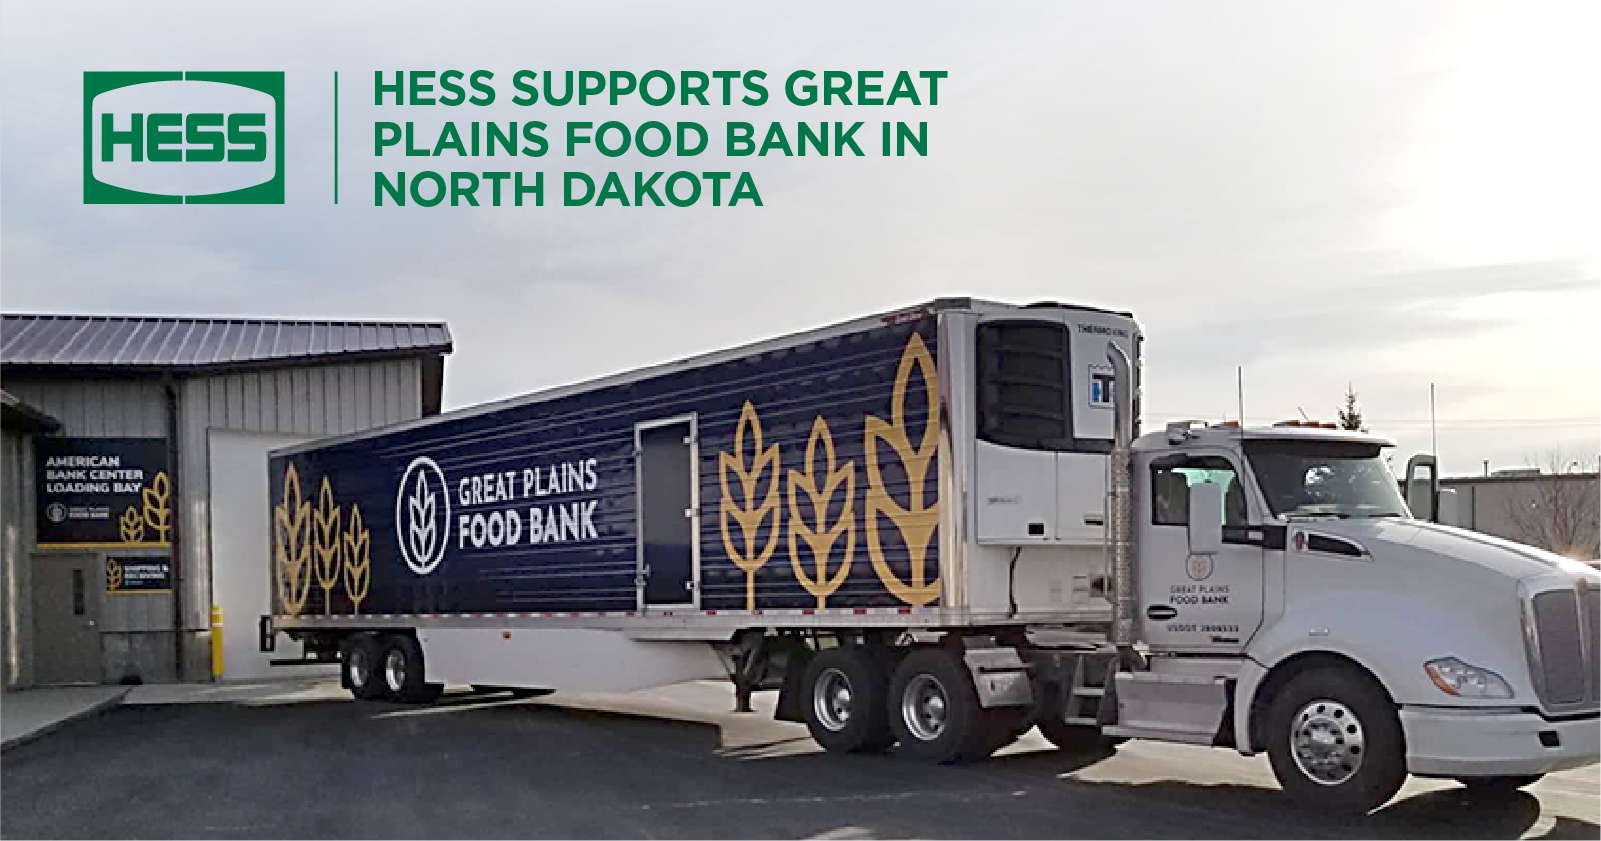 Hess Supports Great Plains Food Bank in North Dakota